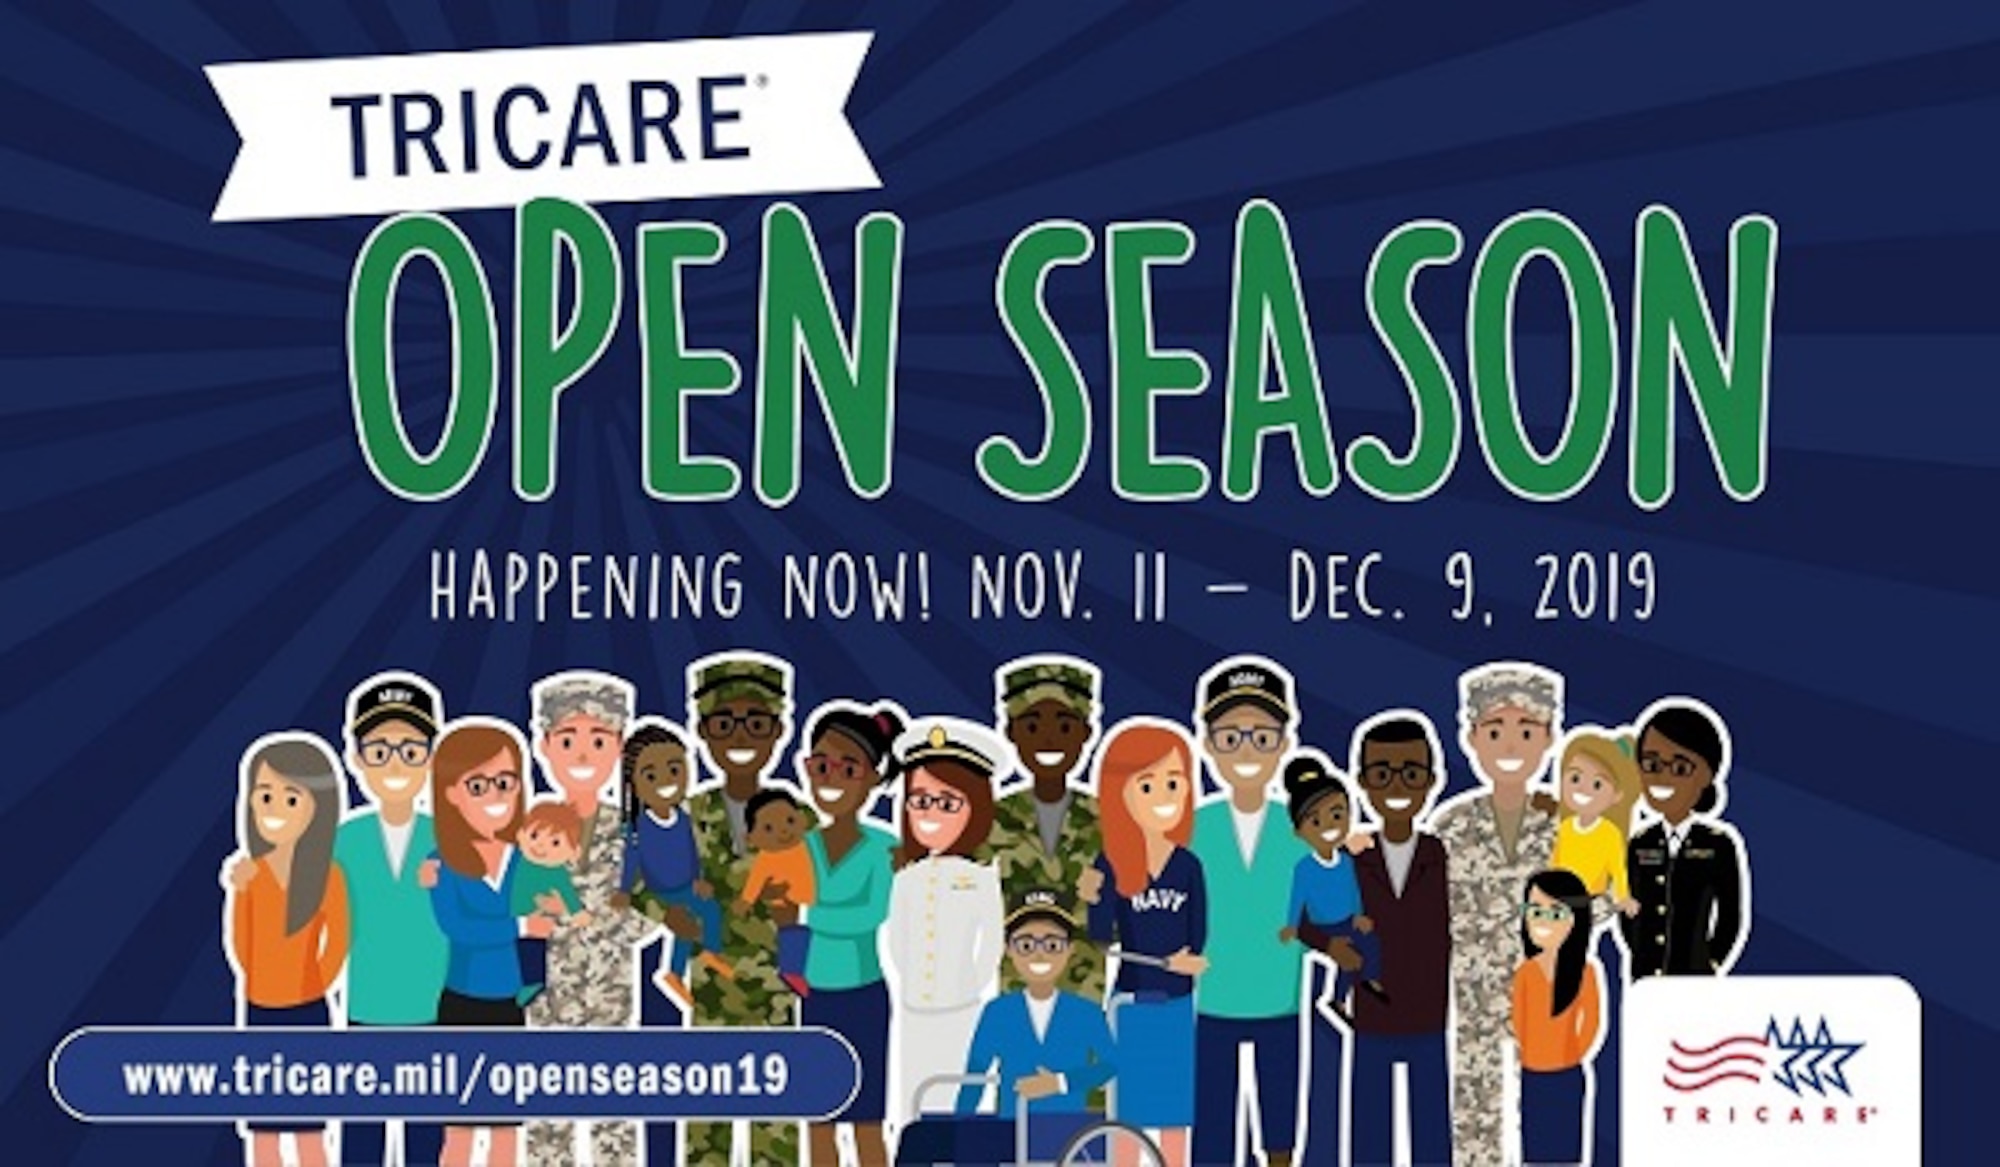 It’s that time of year again. Open season for TRICARE and the Federal Employees Dental and Vision Insurance Program is now open. You’ll have until Dec. 9, 2019 to enroll in a plan or make changes to your existing plan. The changes that you make will become effective Jan. 1, 2020. (Graphic by TRICARE Communications)